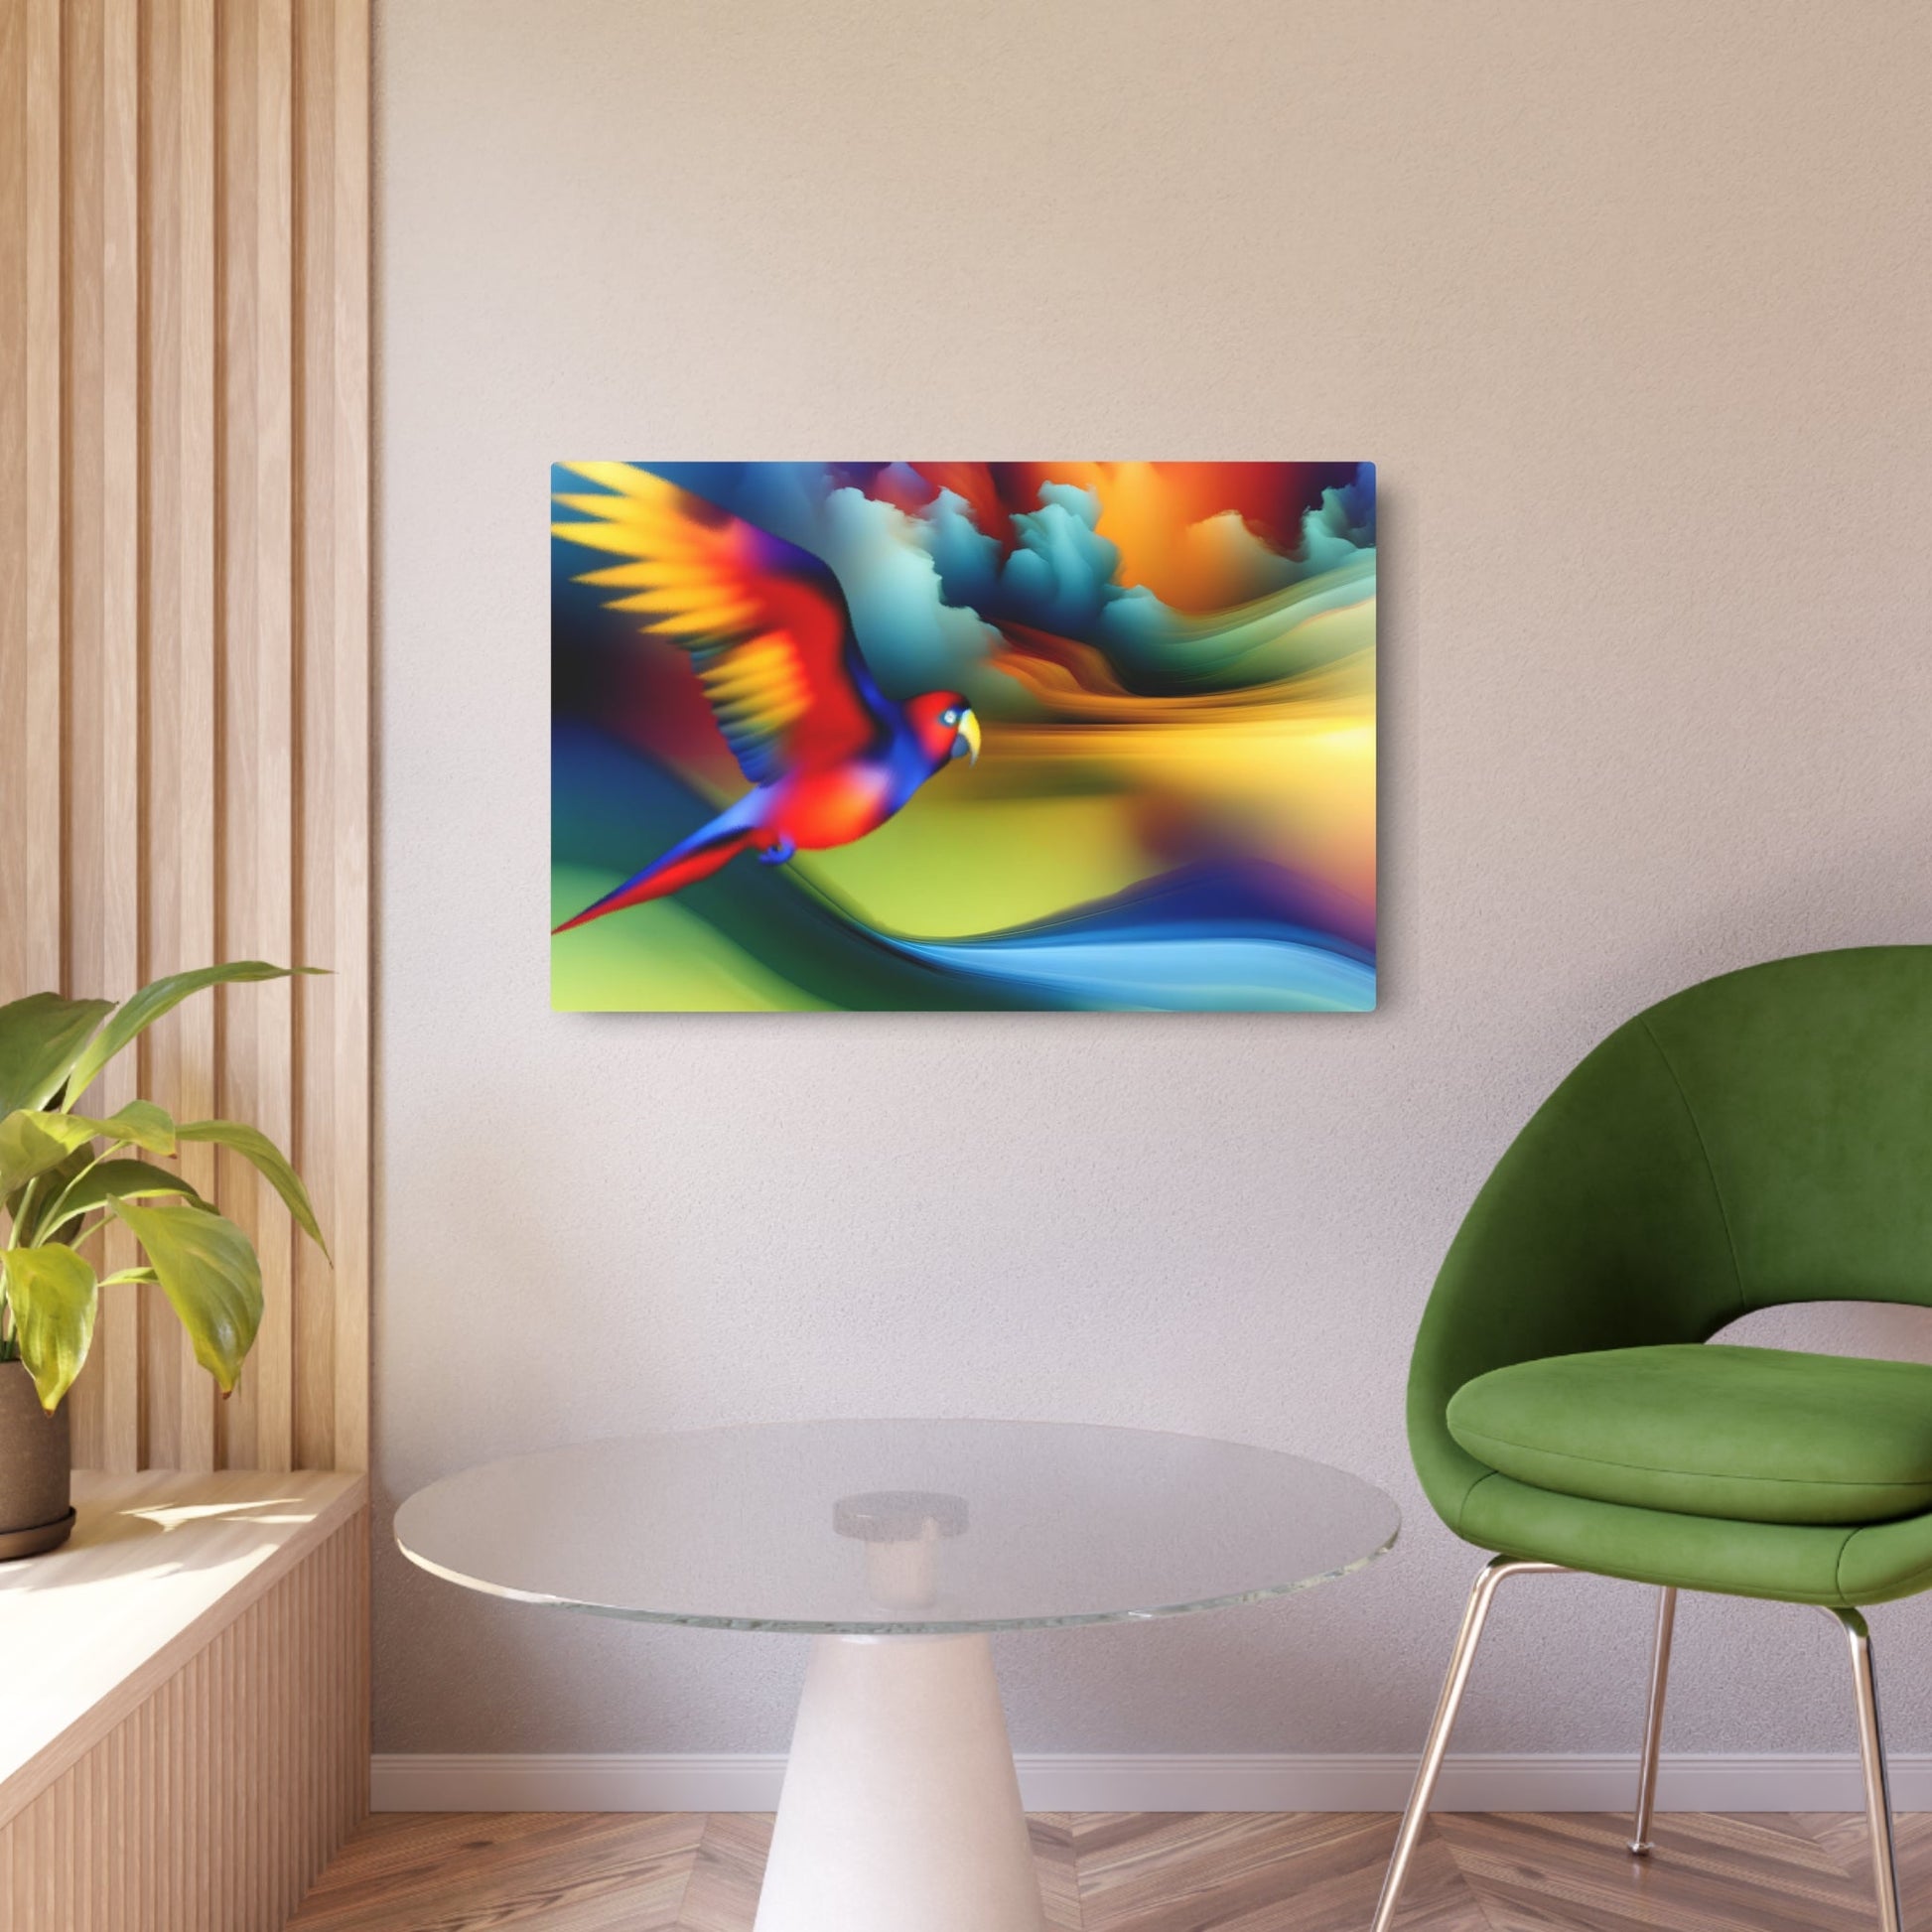 Metal Poster Art | "Vibrant, Color-Saturated Bird in Mid-Flight - Modern Digital Art with Surreal Abstract Background" - Metal Poster Art 36″ x 24″ (Horizontal) 0.12''